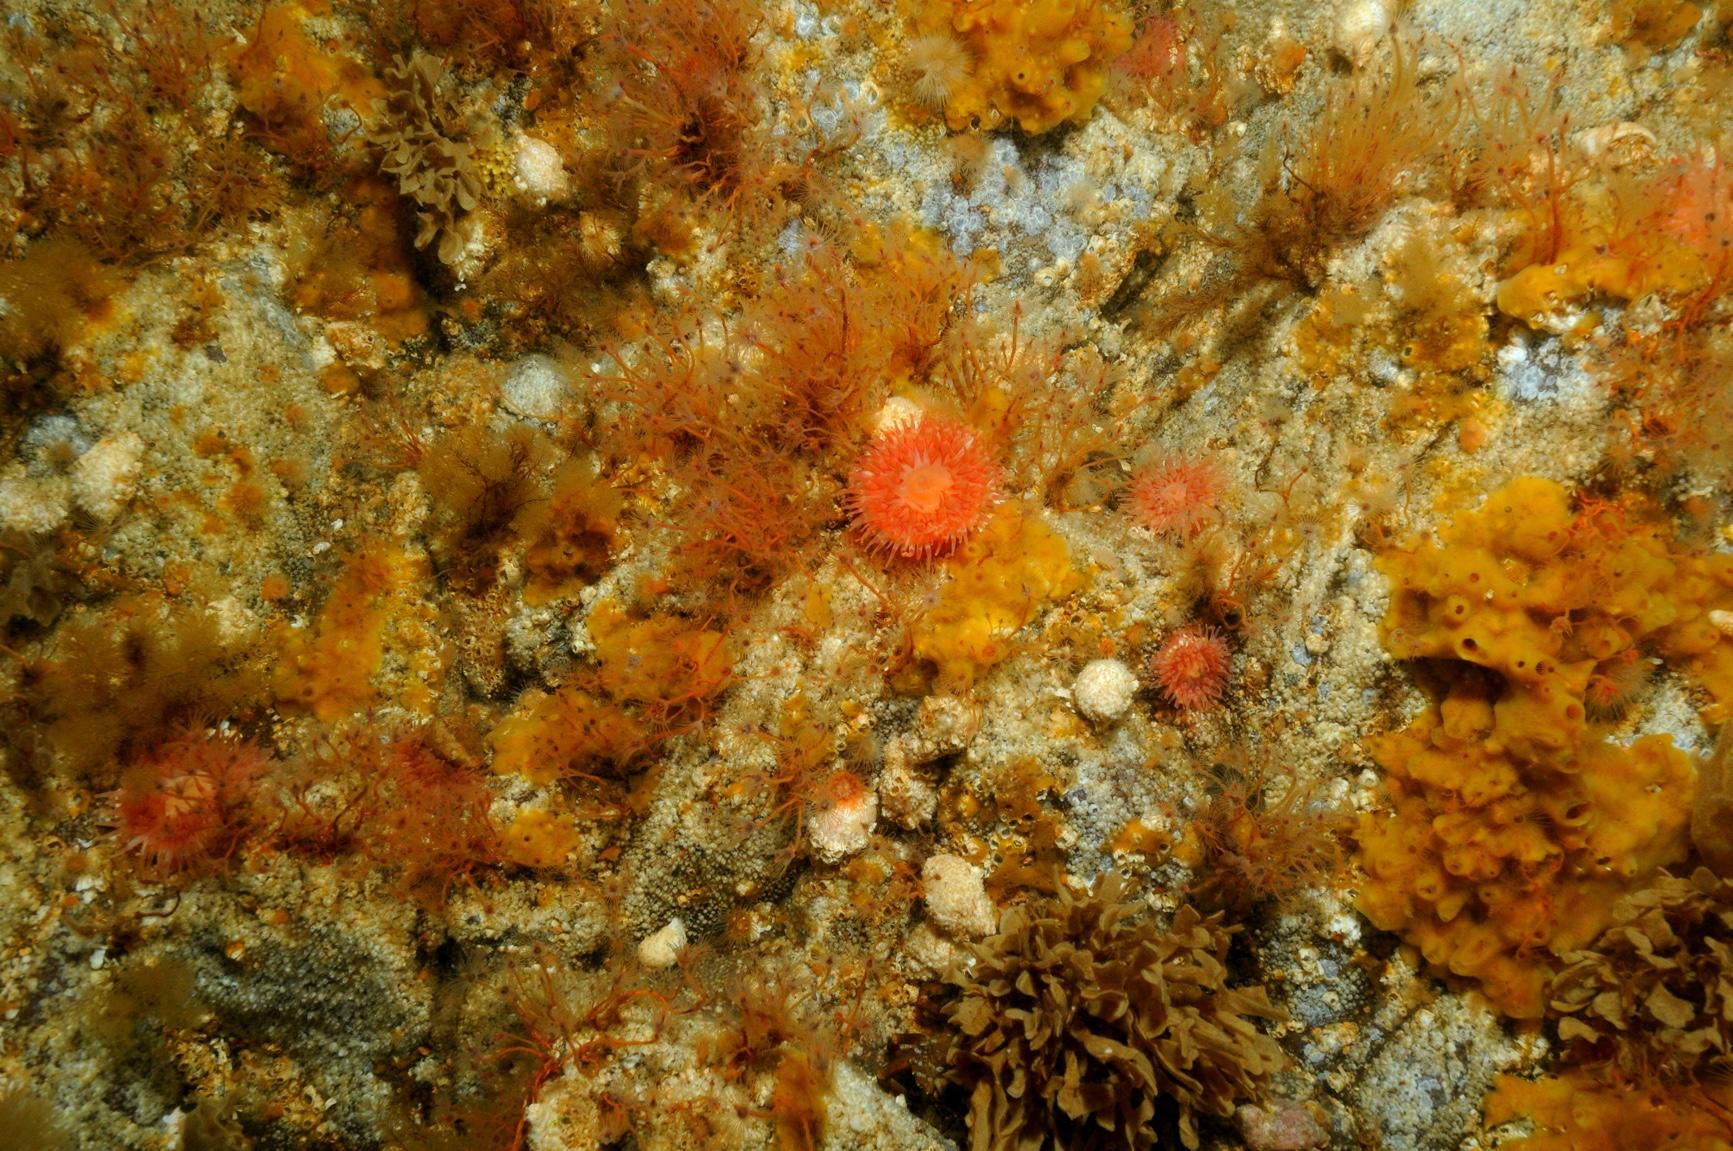 2007, Marine Ecological Surveys Limited, Recoverability of Sabellaria Spinulosa Following Aggregate Extraction, Aggregate Levy Sustainability Fund